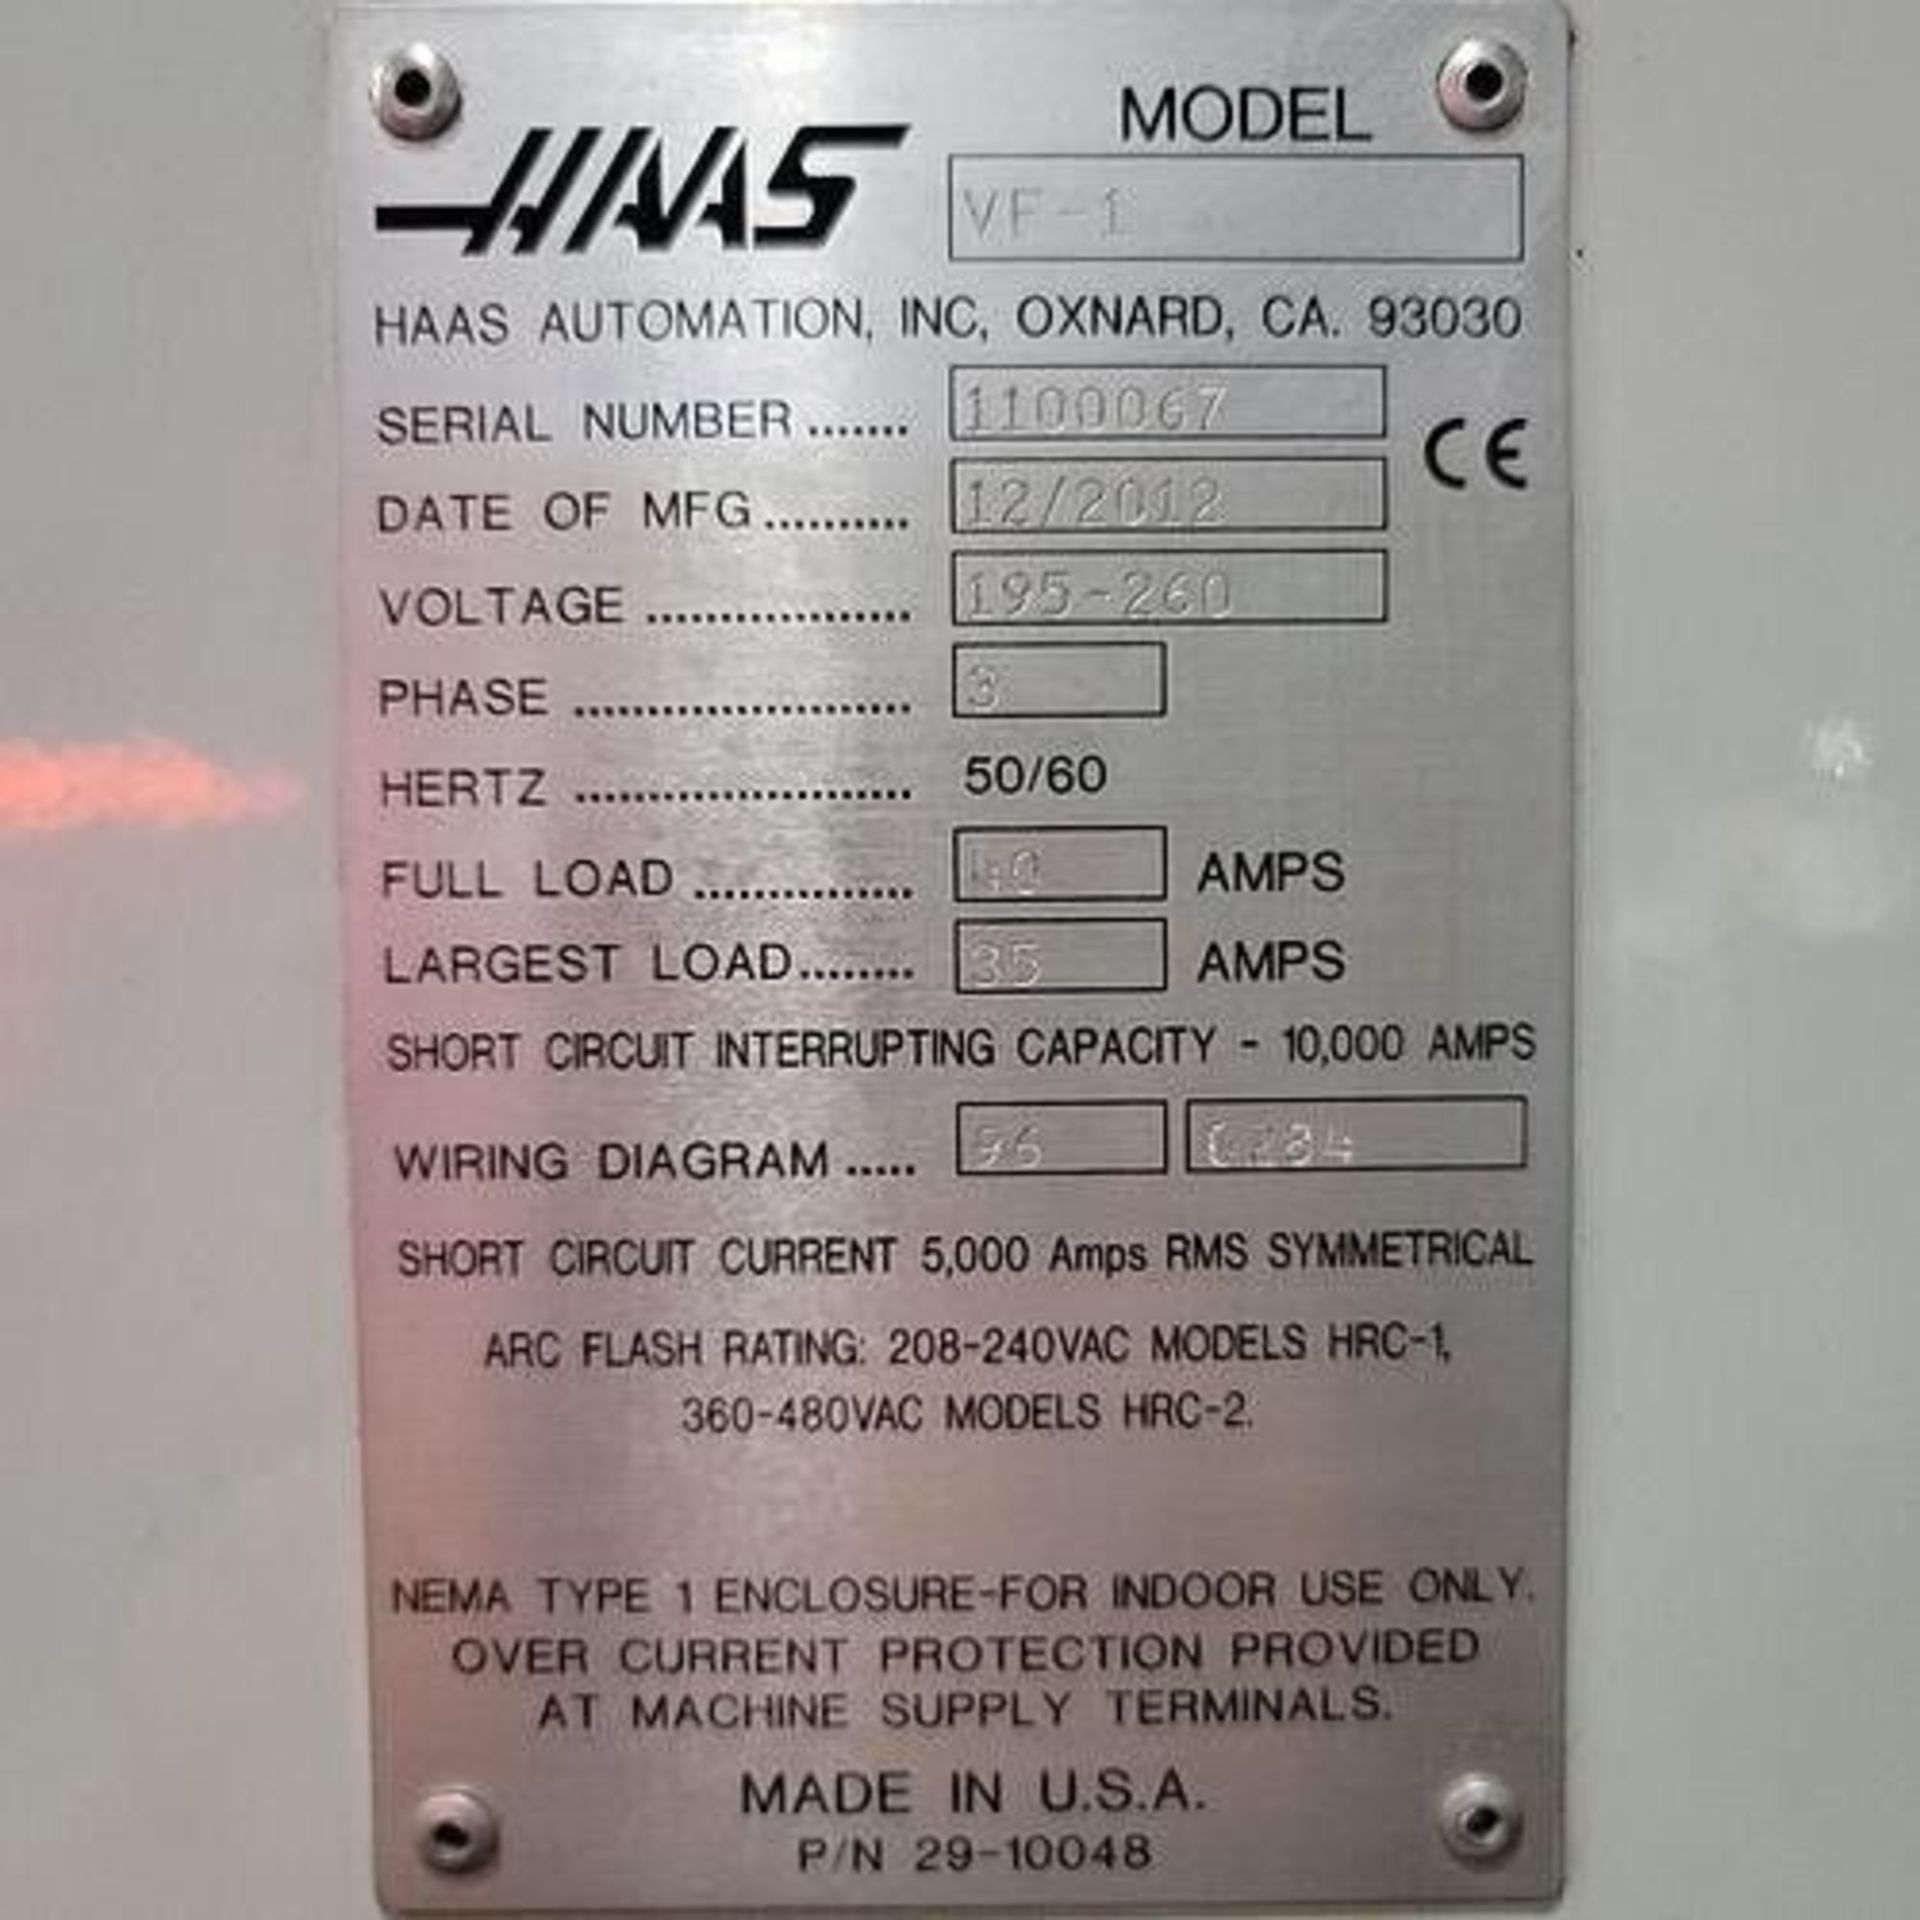 2012 HAAS VF-1 CNC Vertical Machining Center - Image 9 of 10